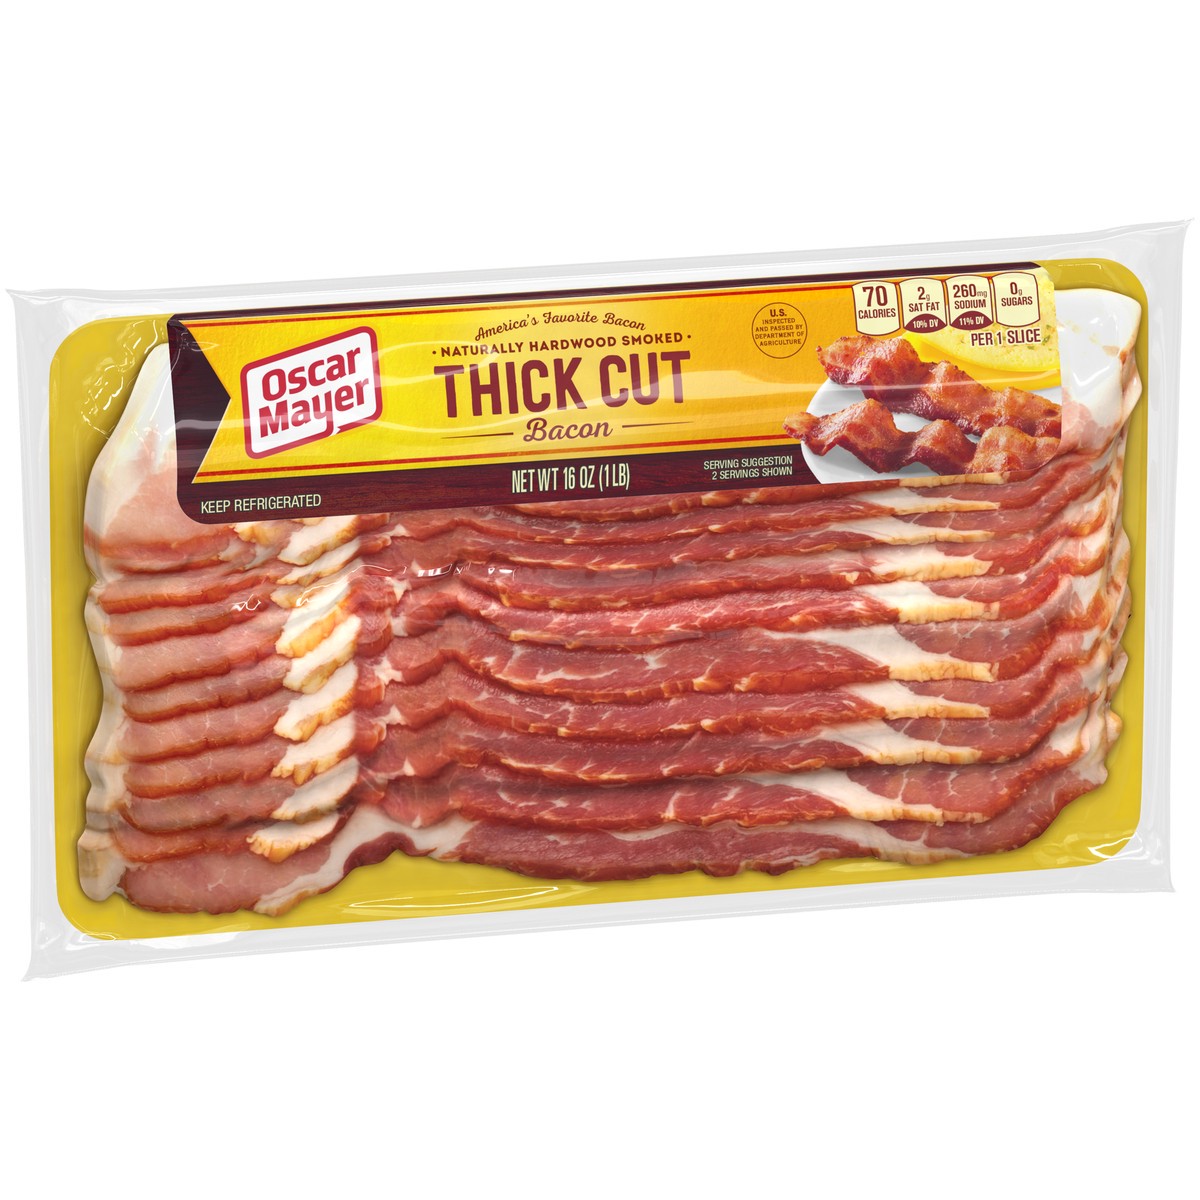 slide 4 of 15, Oscar Mayer Naturally Hardwood Smoked Thick Cut Bacon, 16 oz Pack, 11-13 slices, 16 oz